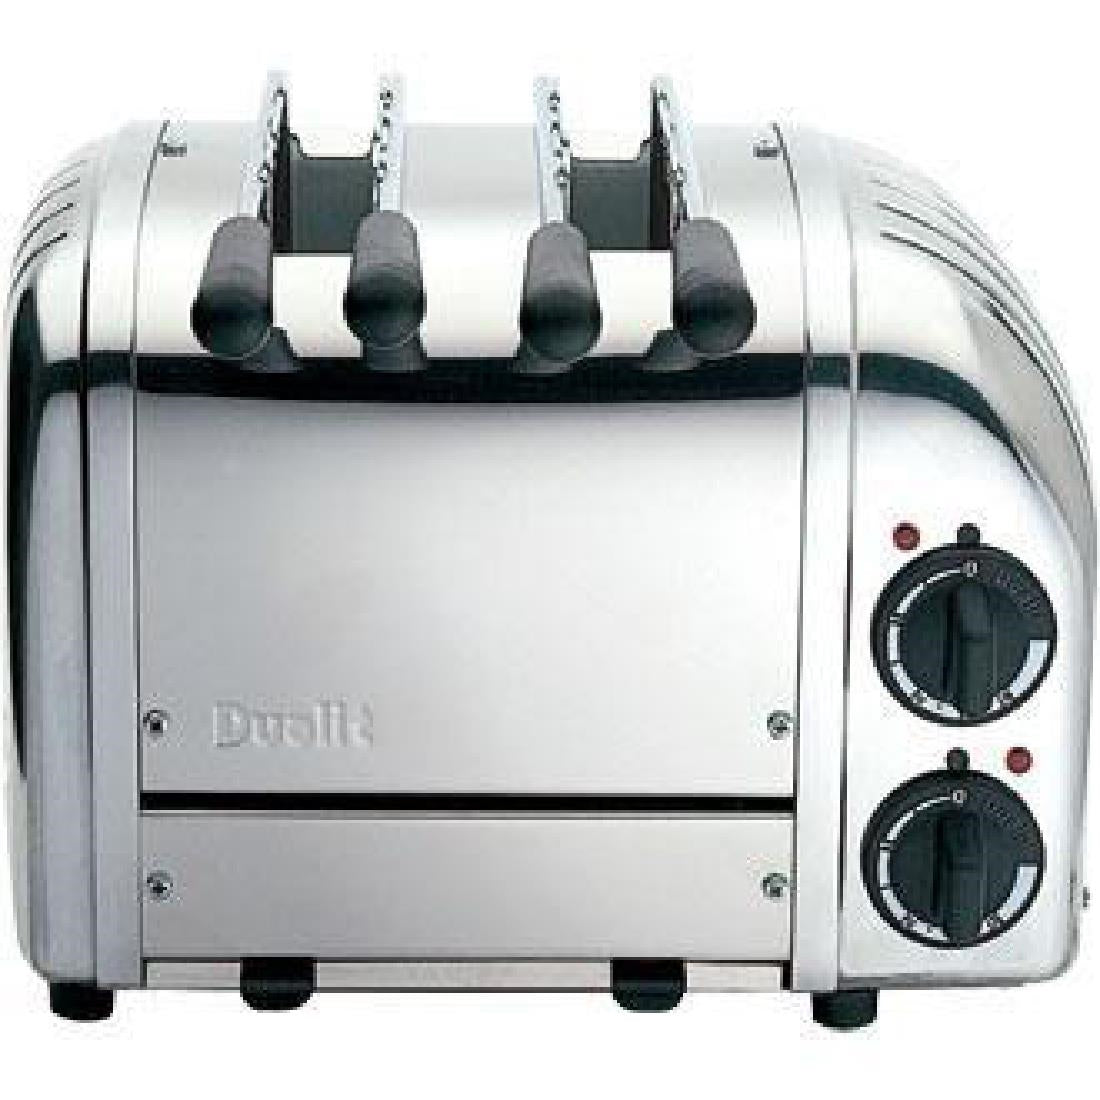 Dualit 2 Slice Vario Sandwich Toaster Polished Finish 21056 JD Catering Equipment Solutions Ltd